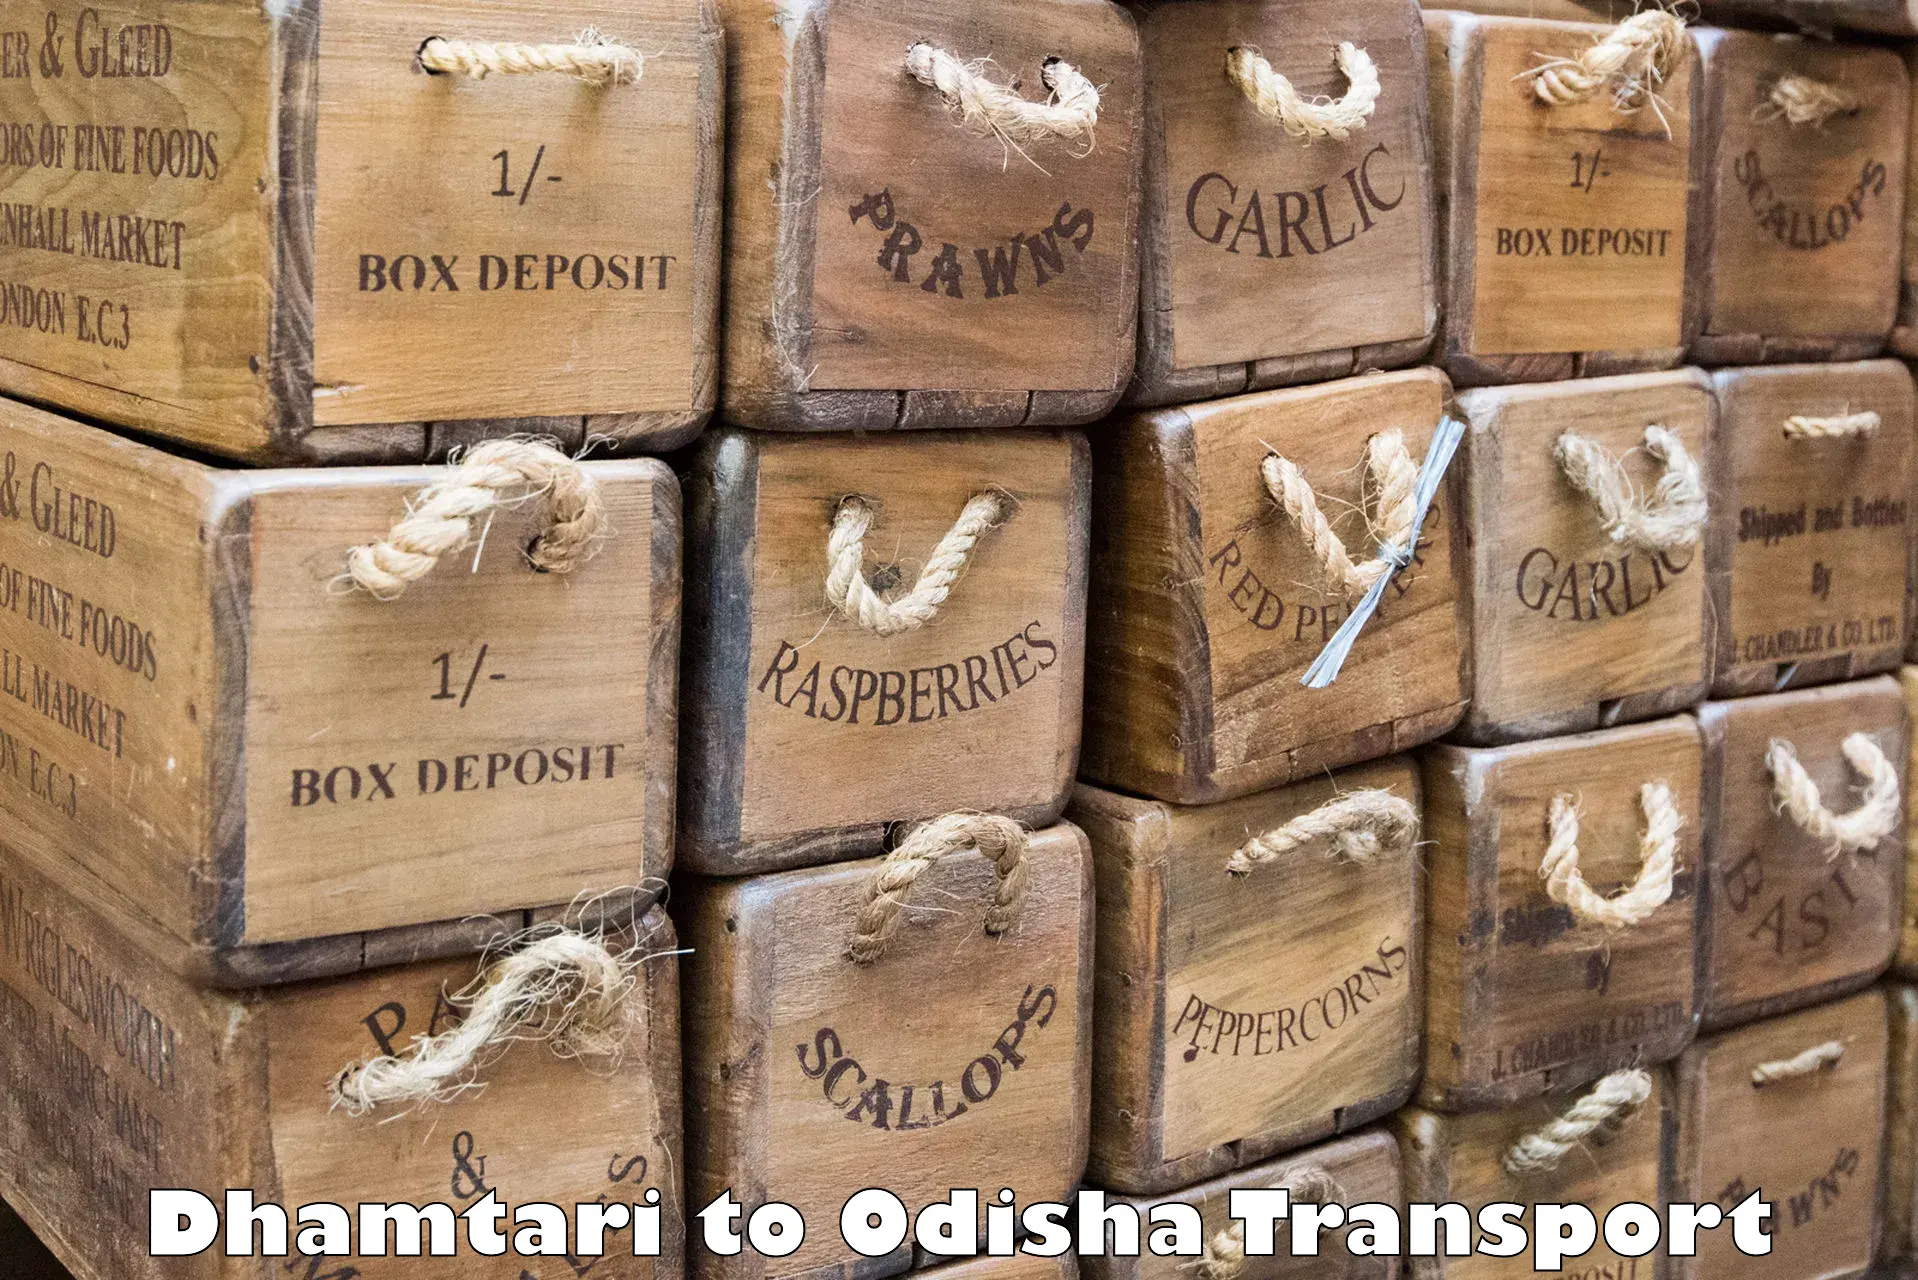 Air freight transport services Dhamtari to Bonth